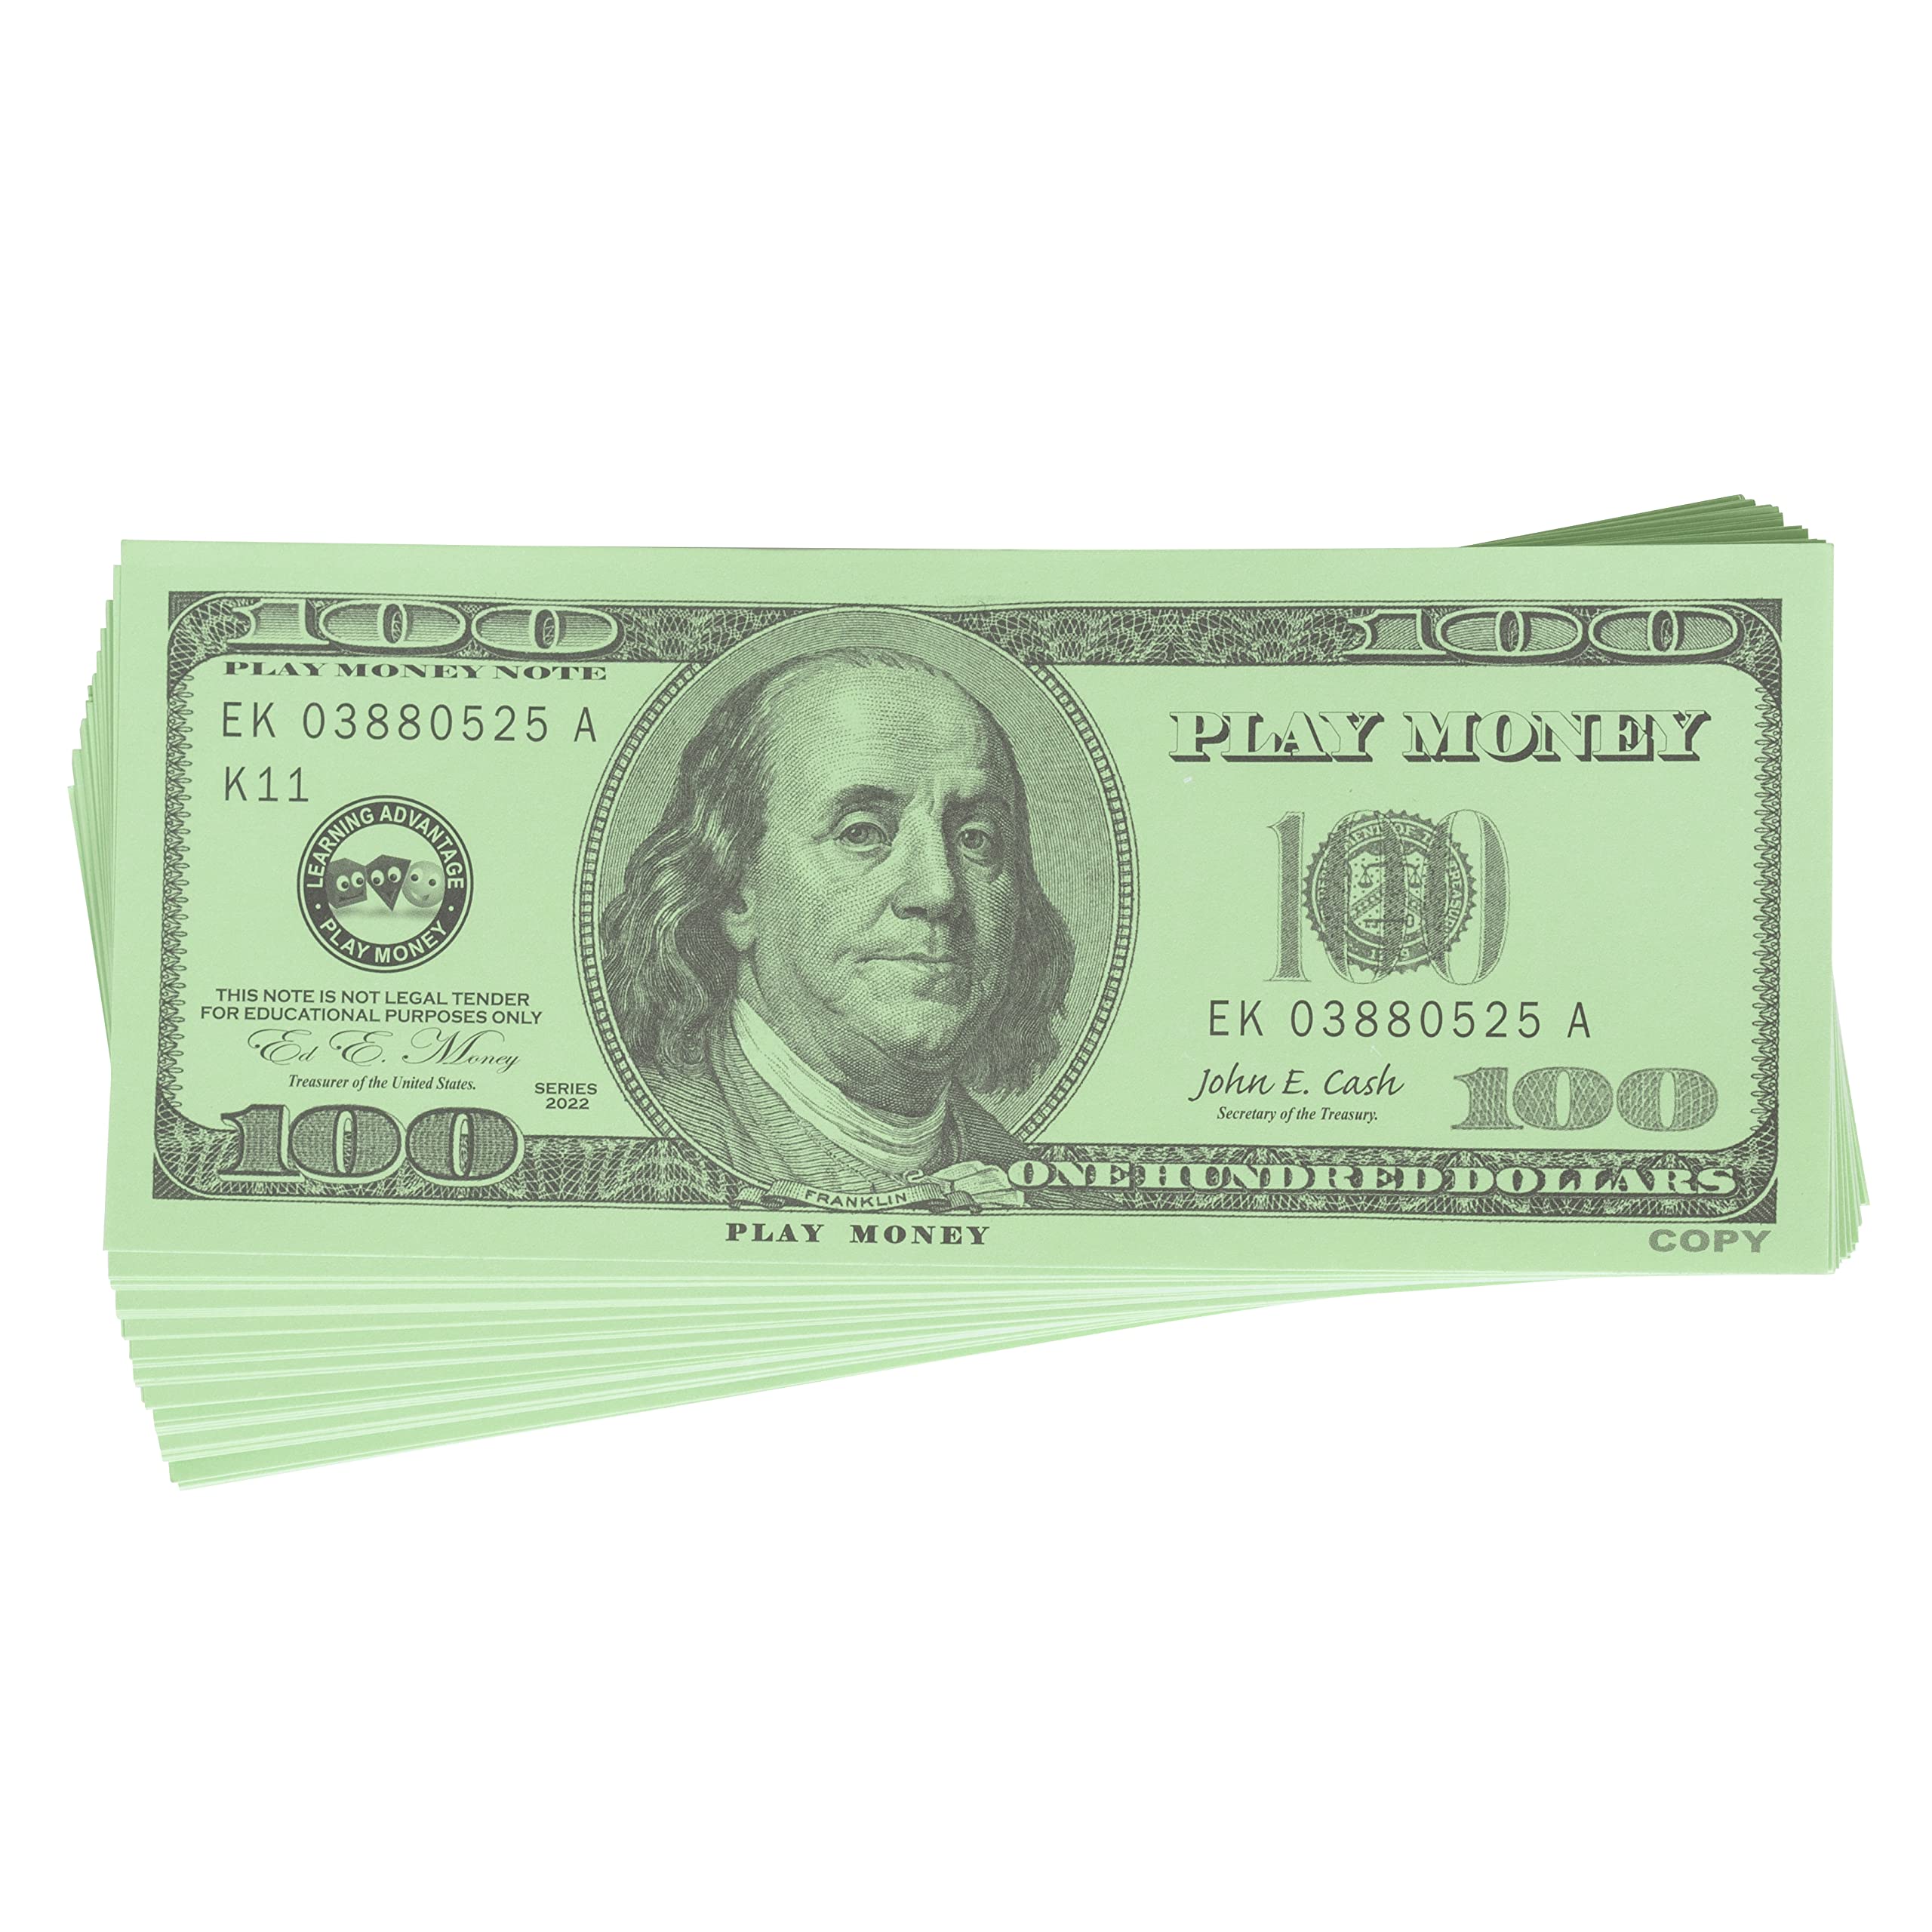 LEARNING ADVANTAGE One Hundred Dollar Play Bills - Set of 50 $100 Paper Bills - Designed and Sized Like Real US Currency - Teach Currency, Counting and Math with Play Money